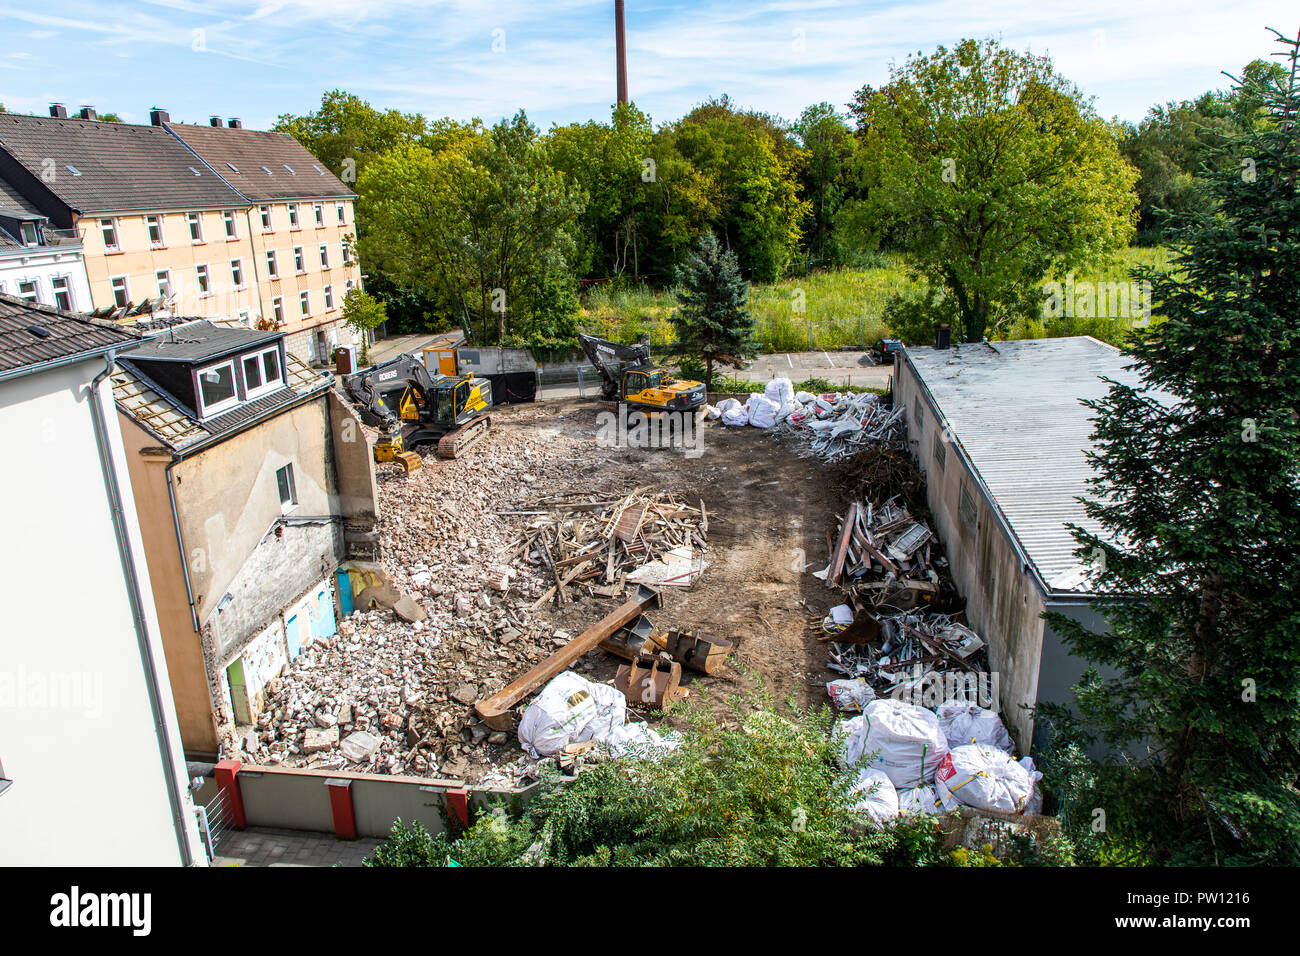 Demolition of an older residential building, new rental flats, Germany Stock Photo